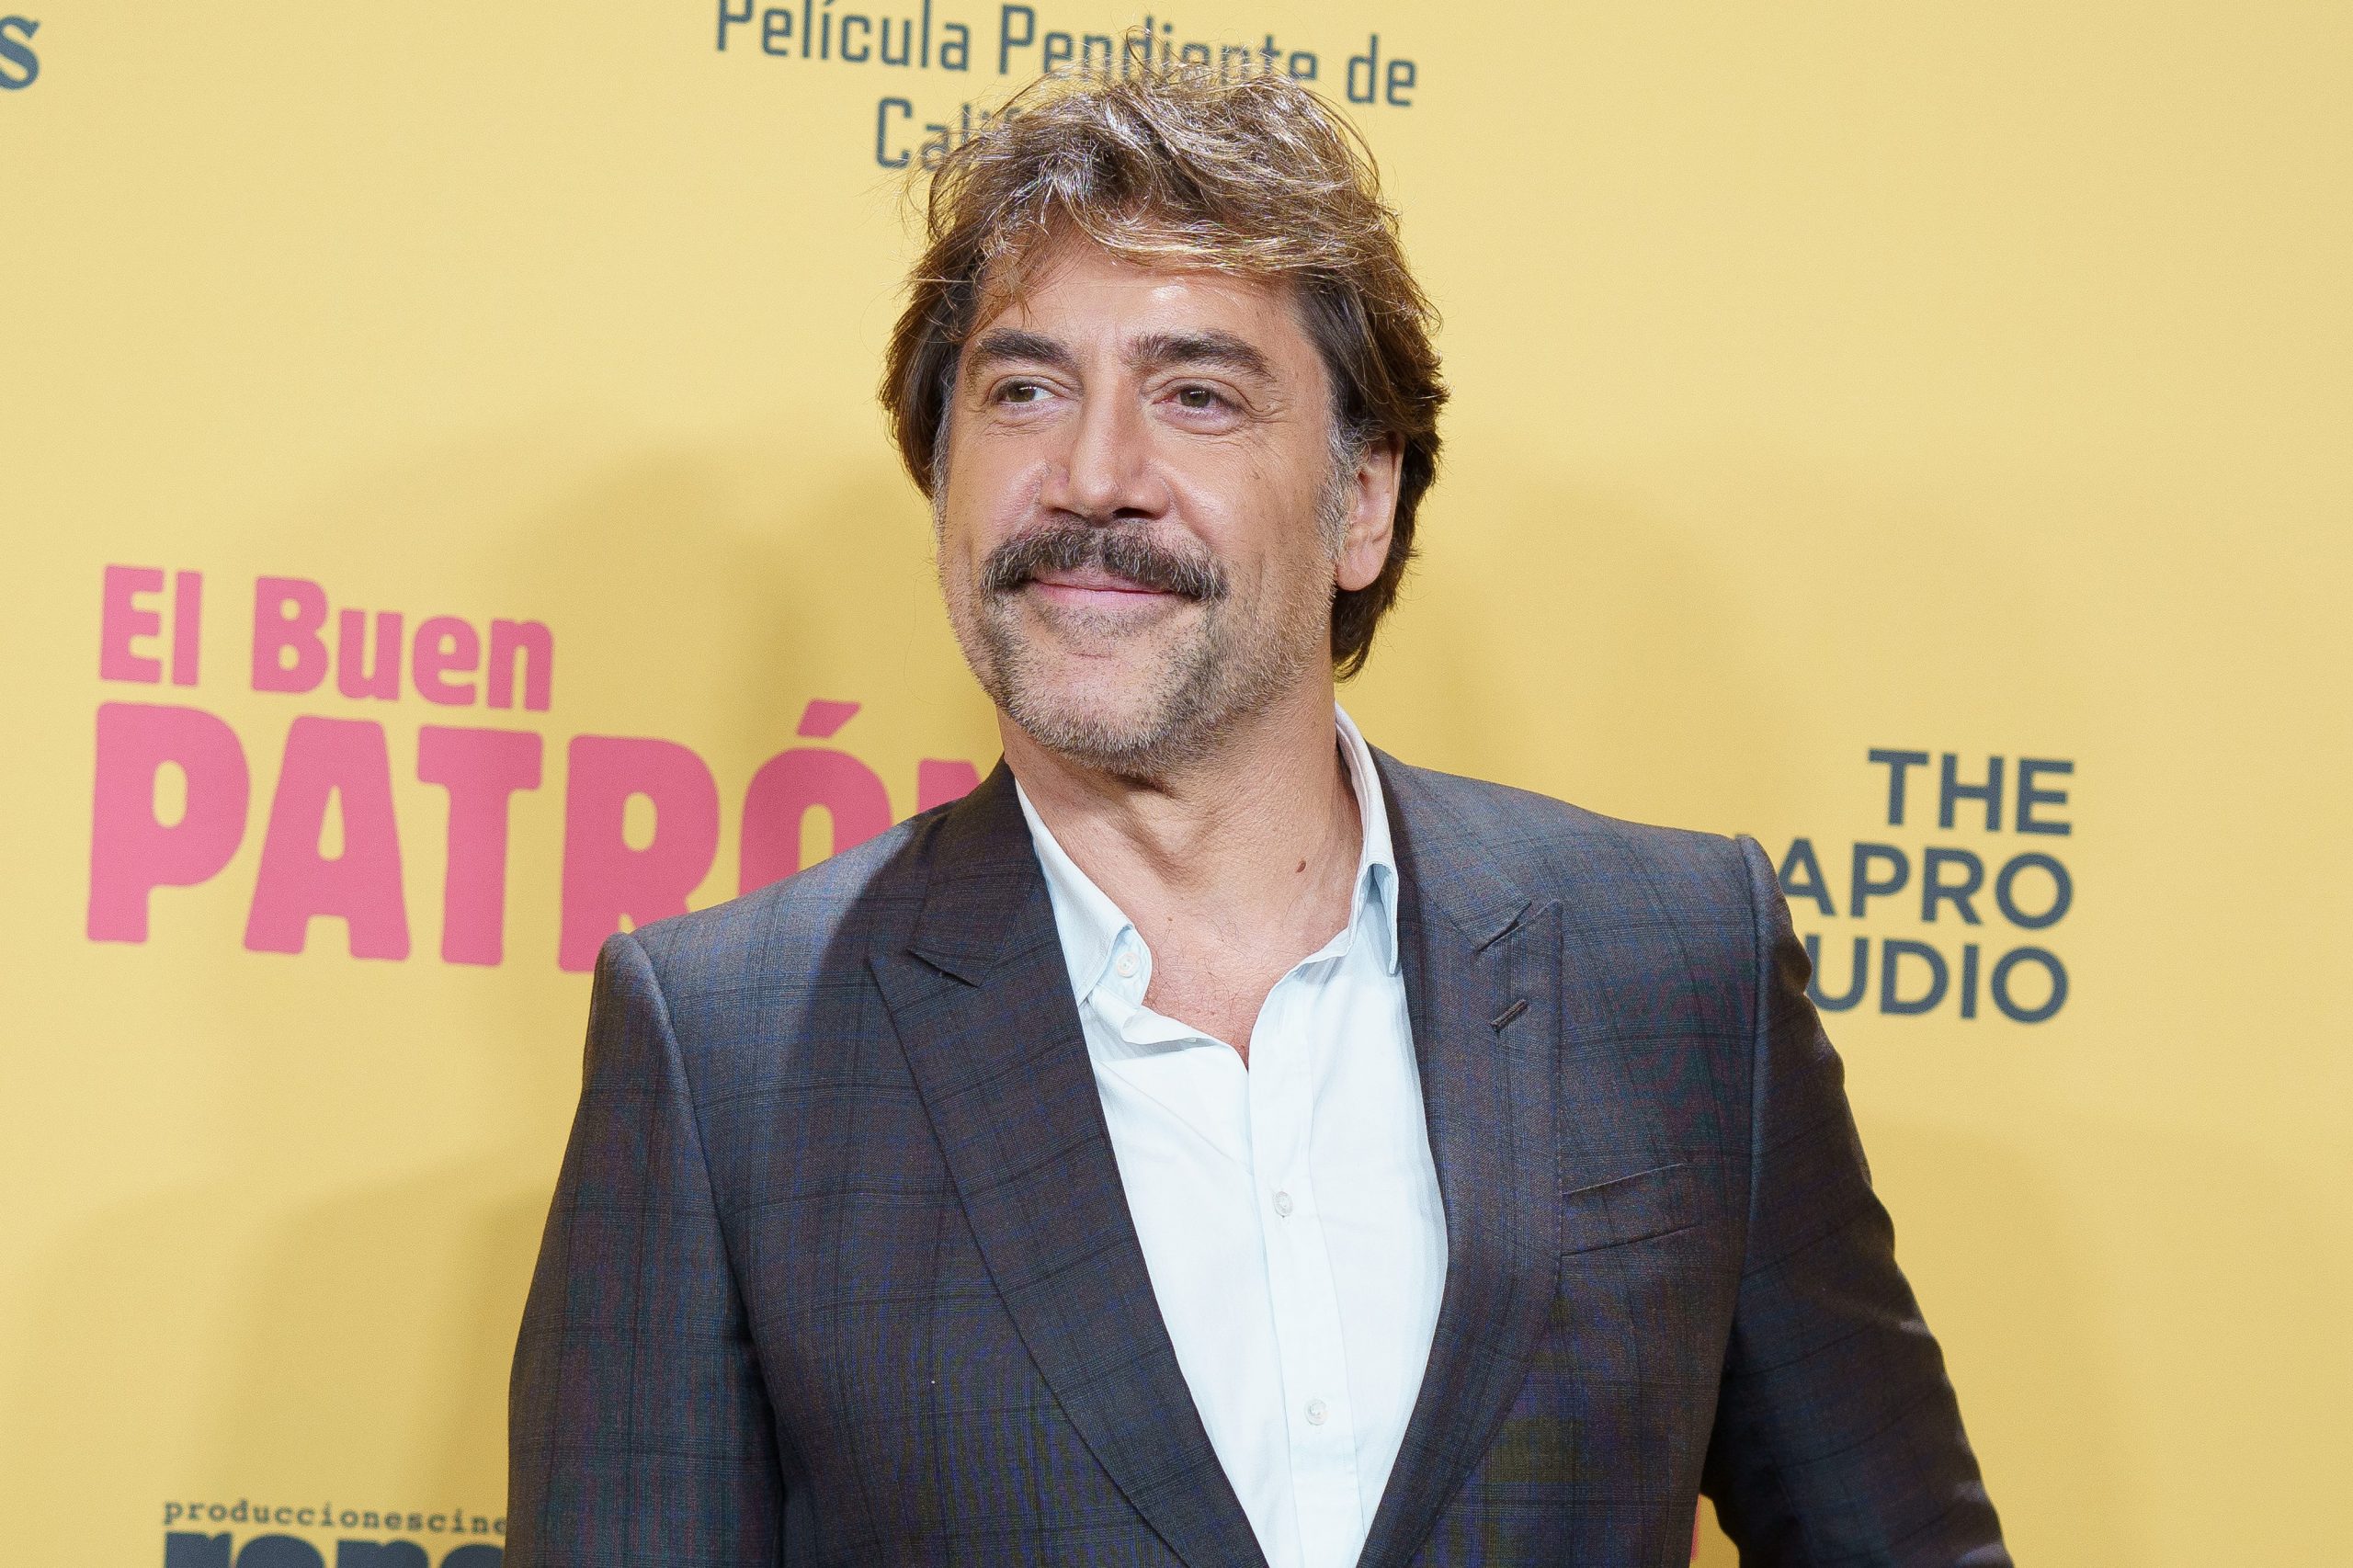 Javier Bardem movie scoops record number of nominations for Goya film awards in Spain